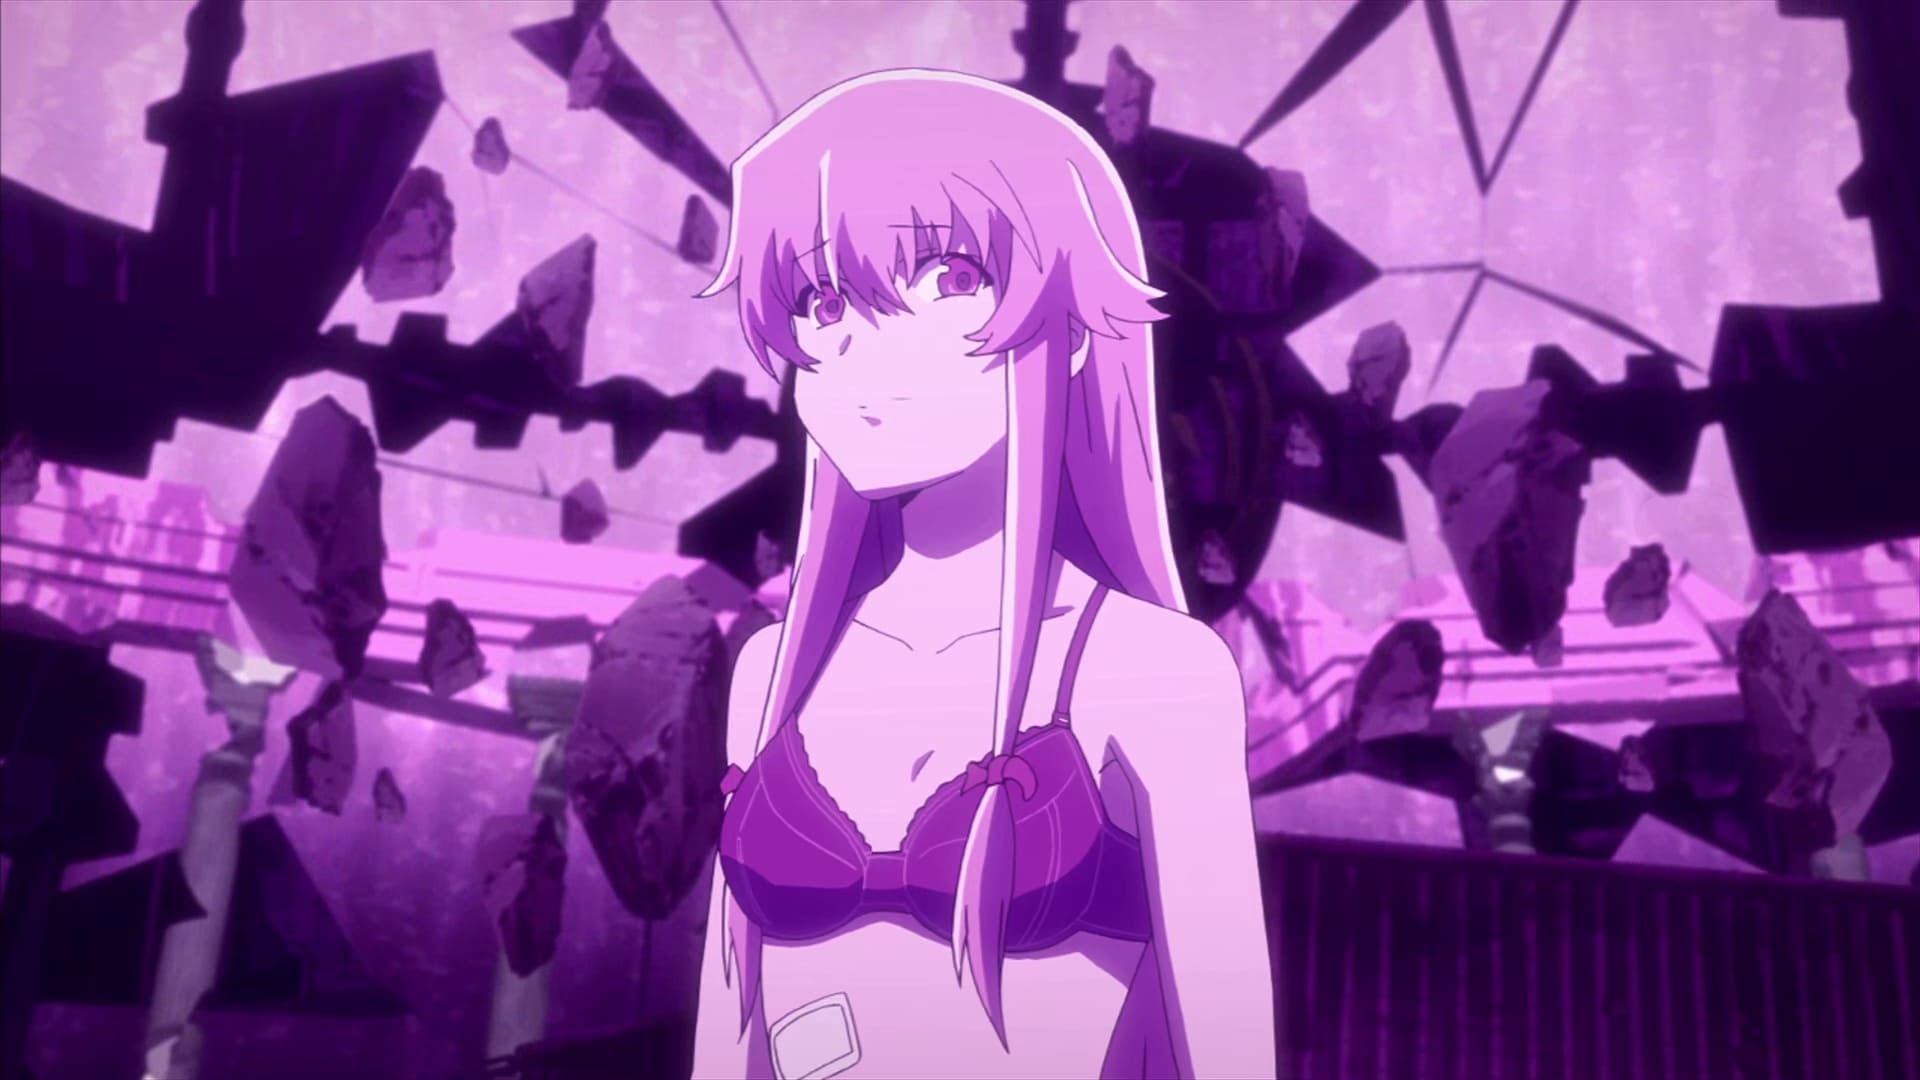 The Future Diary background